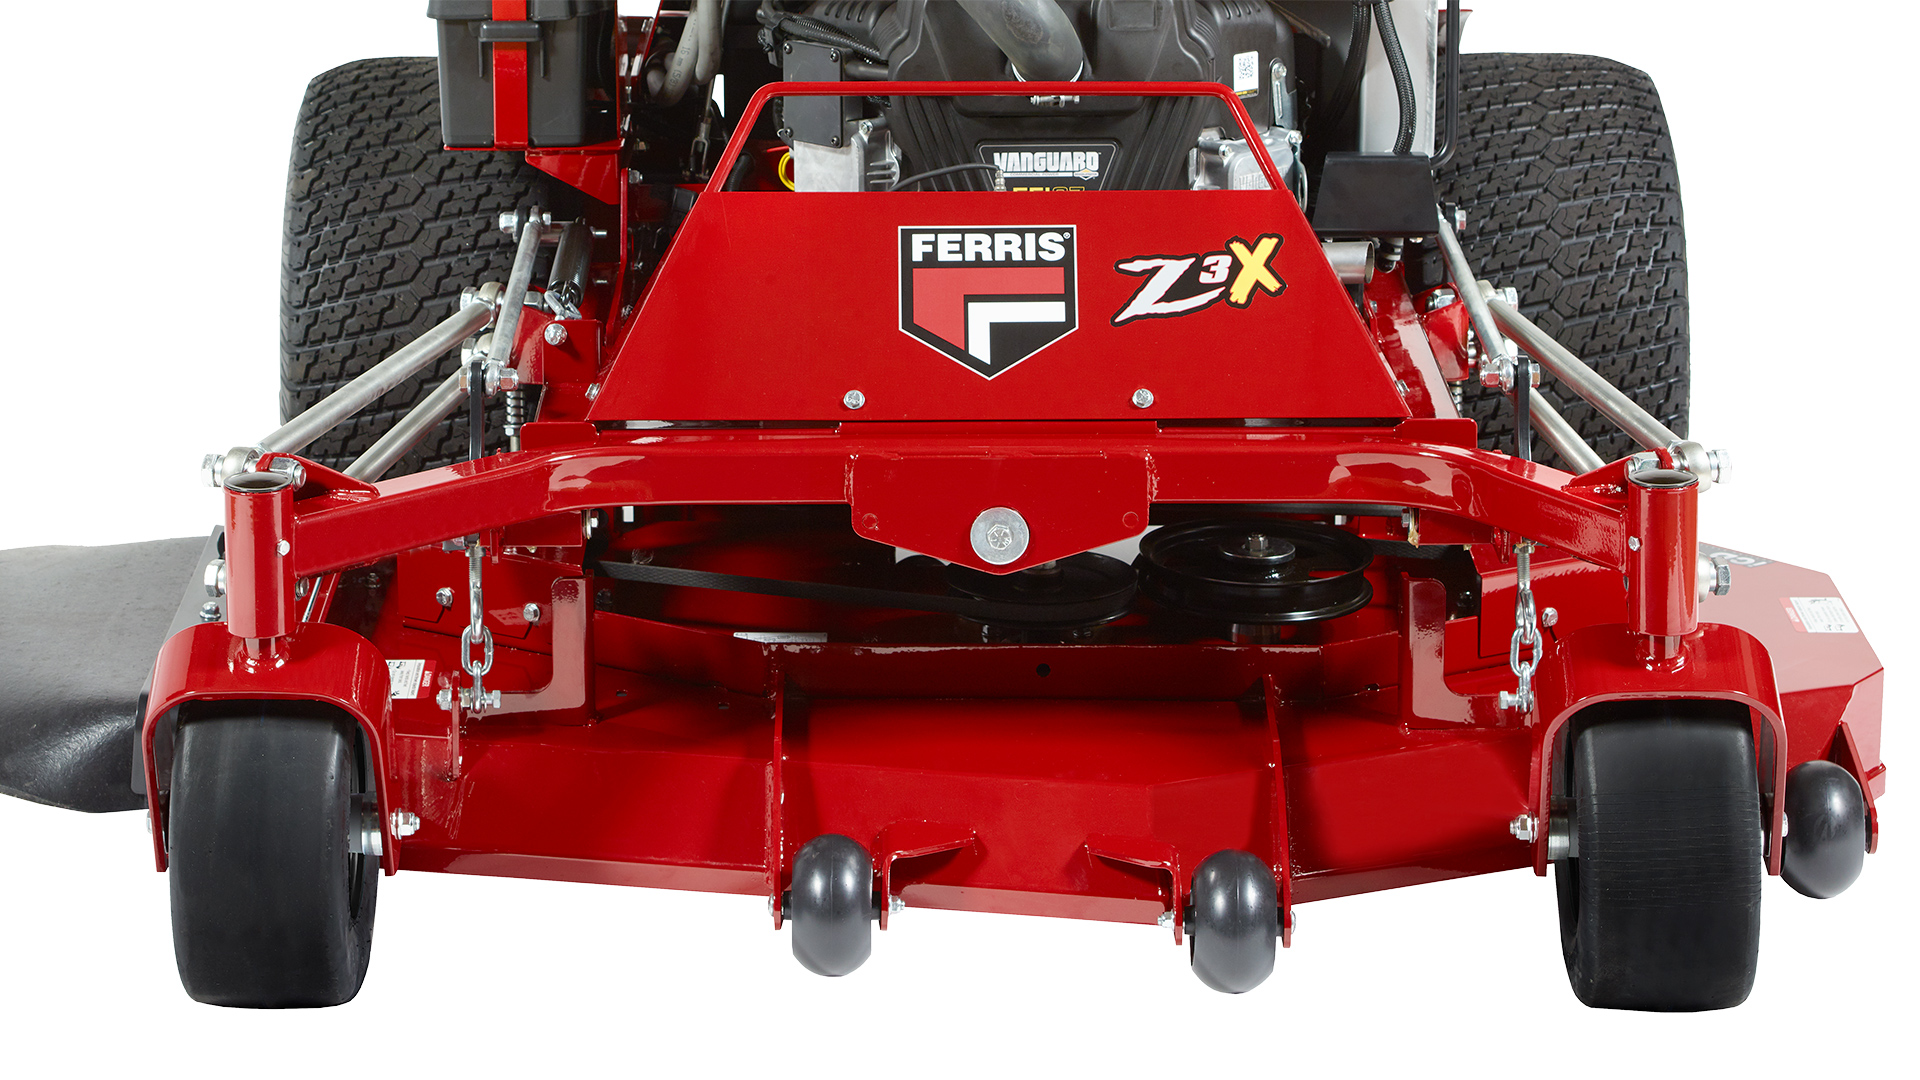 Ferris SRS™ Z3X Soft Ride Stand-On Mowers - Pivoting Front Axle with Radius Rod